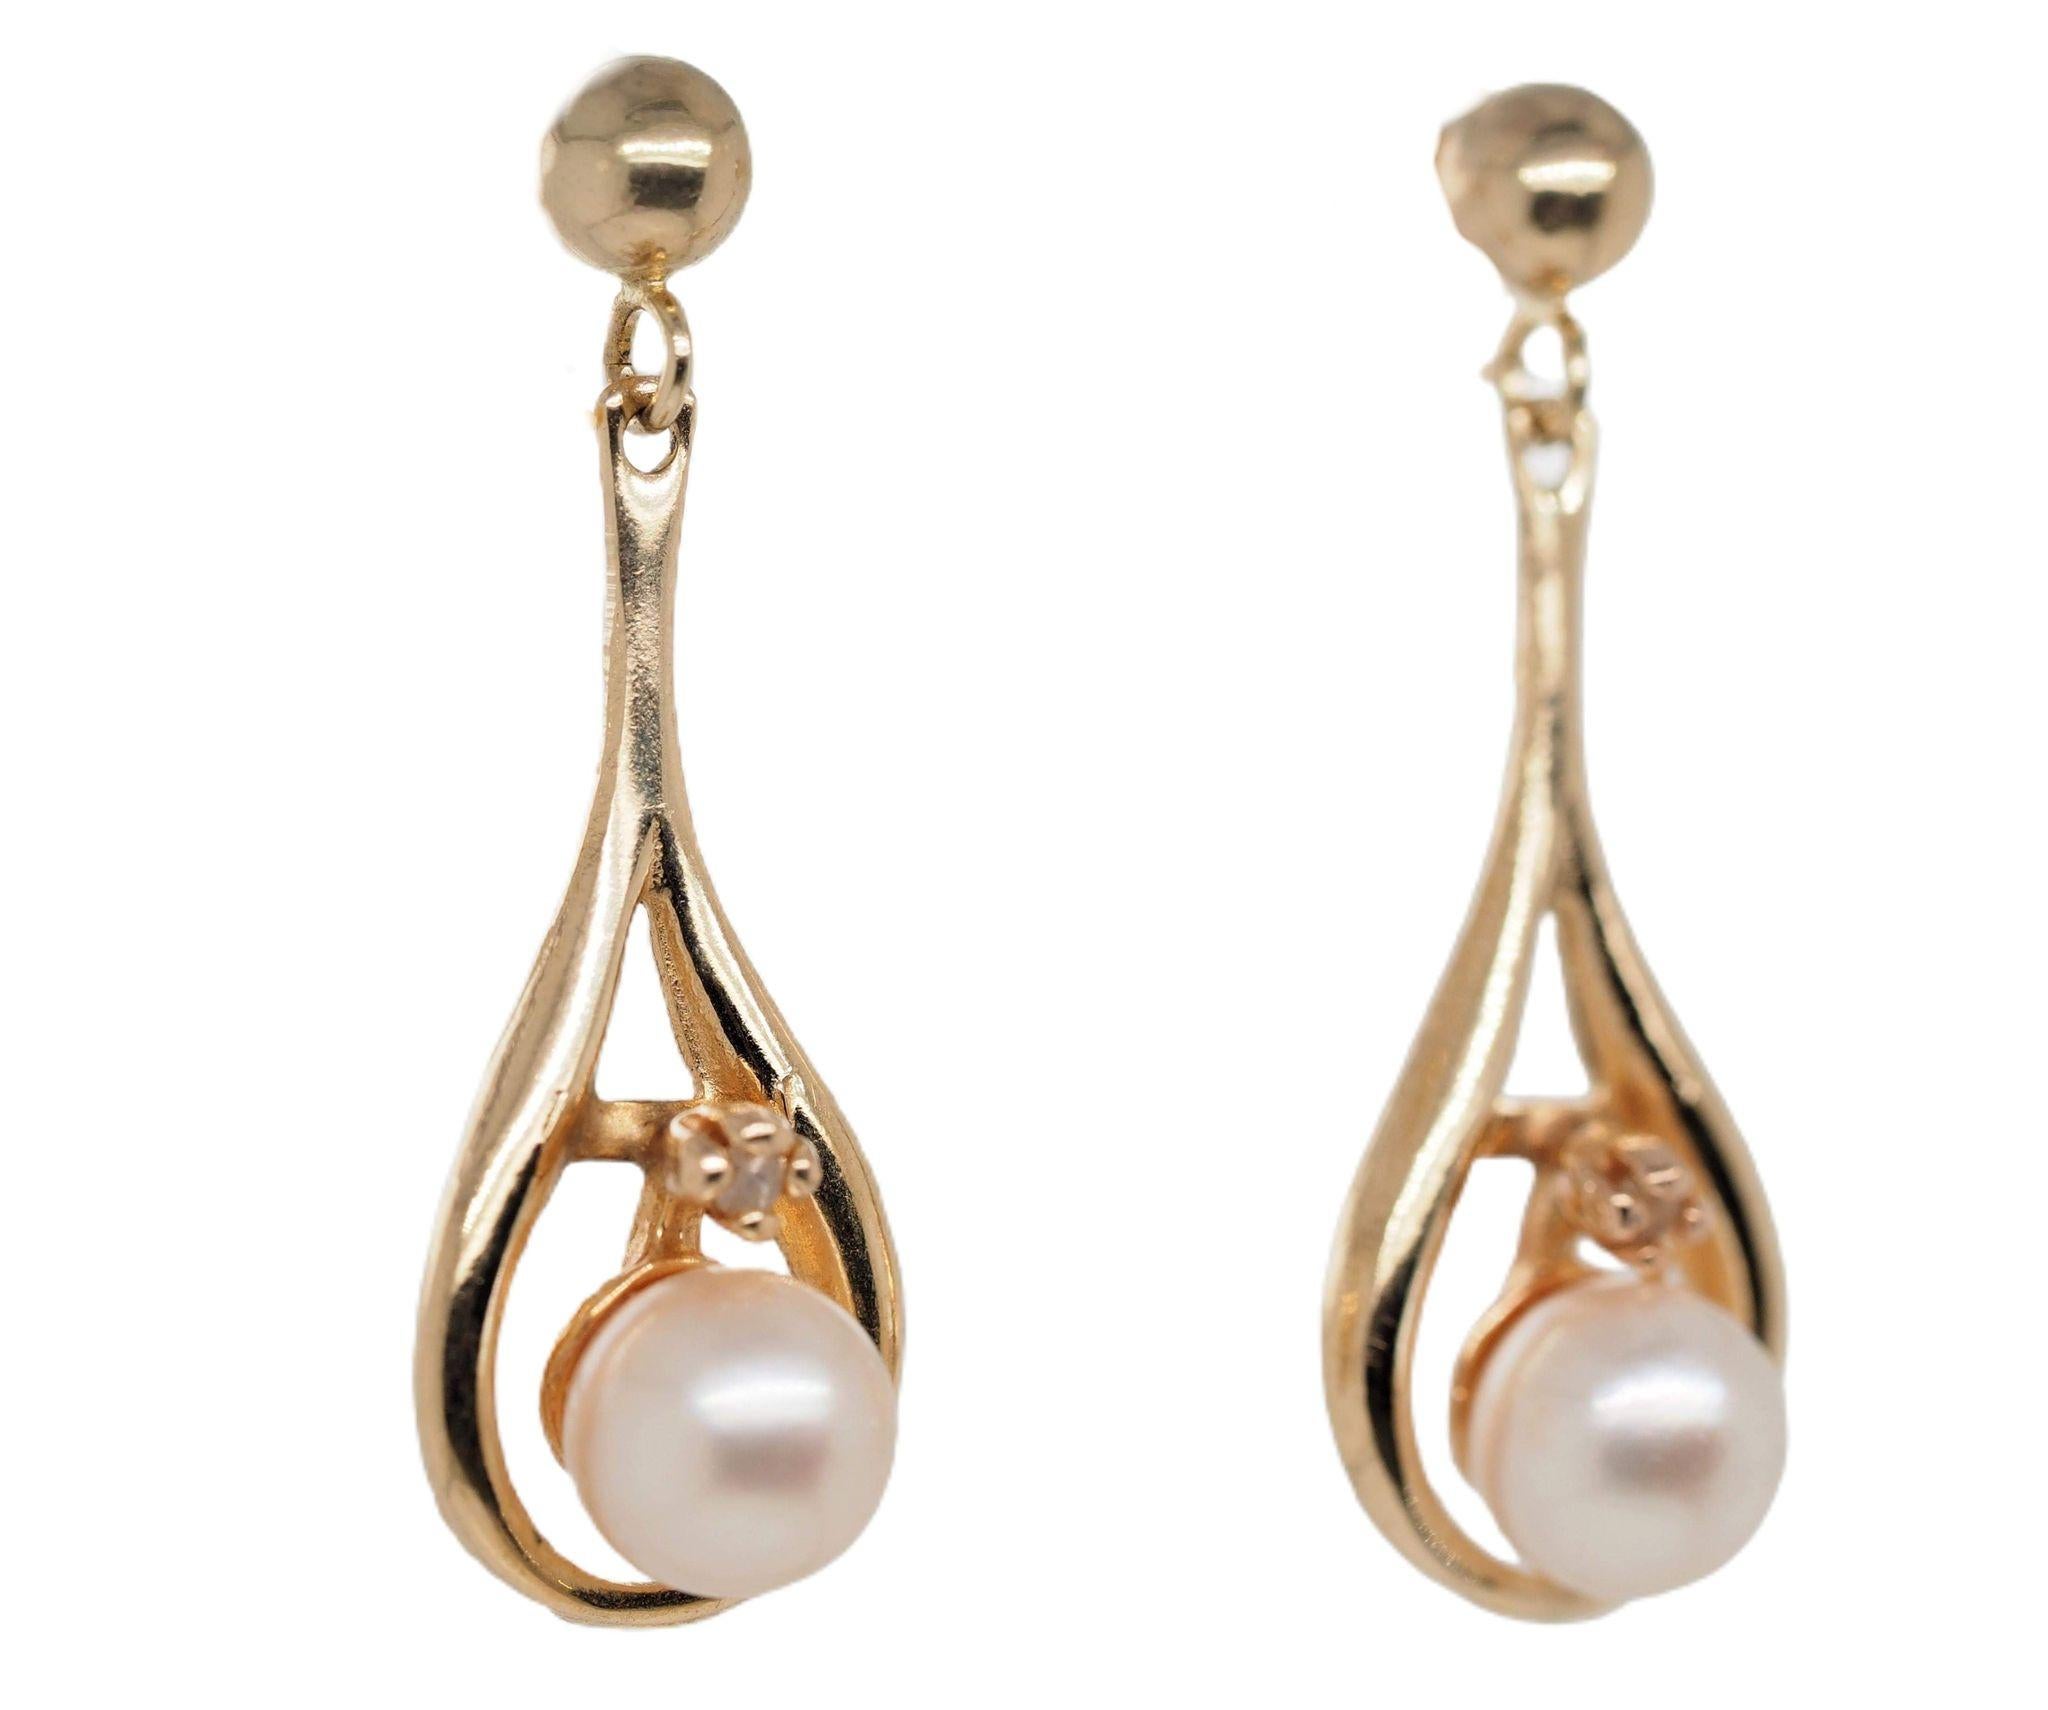 14 Karat Yellow Gold Cultured Akoya Pearl  Earrings measuring 5.5 mm. The perfect accessory to complete your classic and stylish look.  Akoya pearls are renowned for their incredible luster and are considered the classic pearl.  Completed by a post